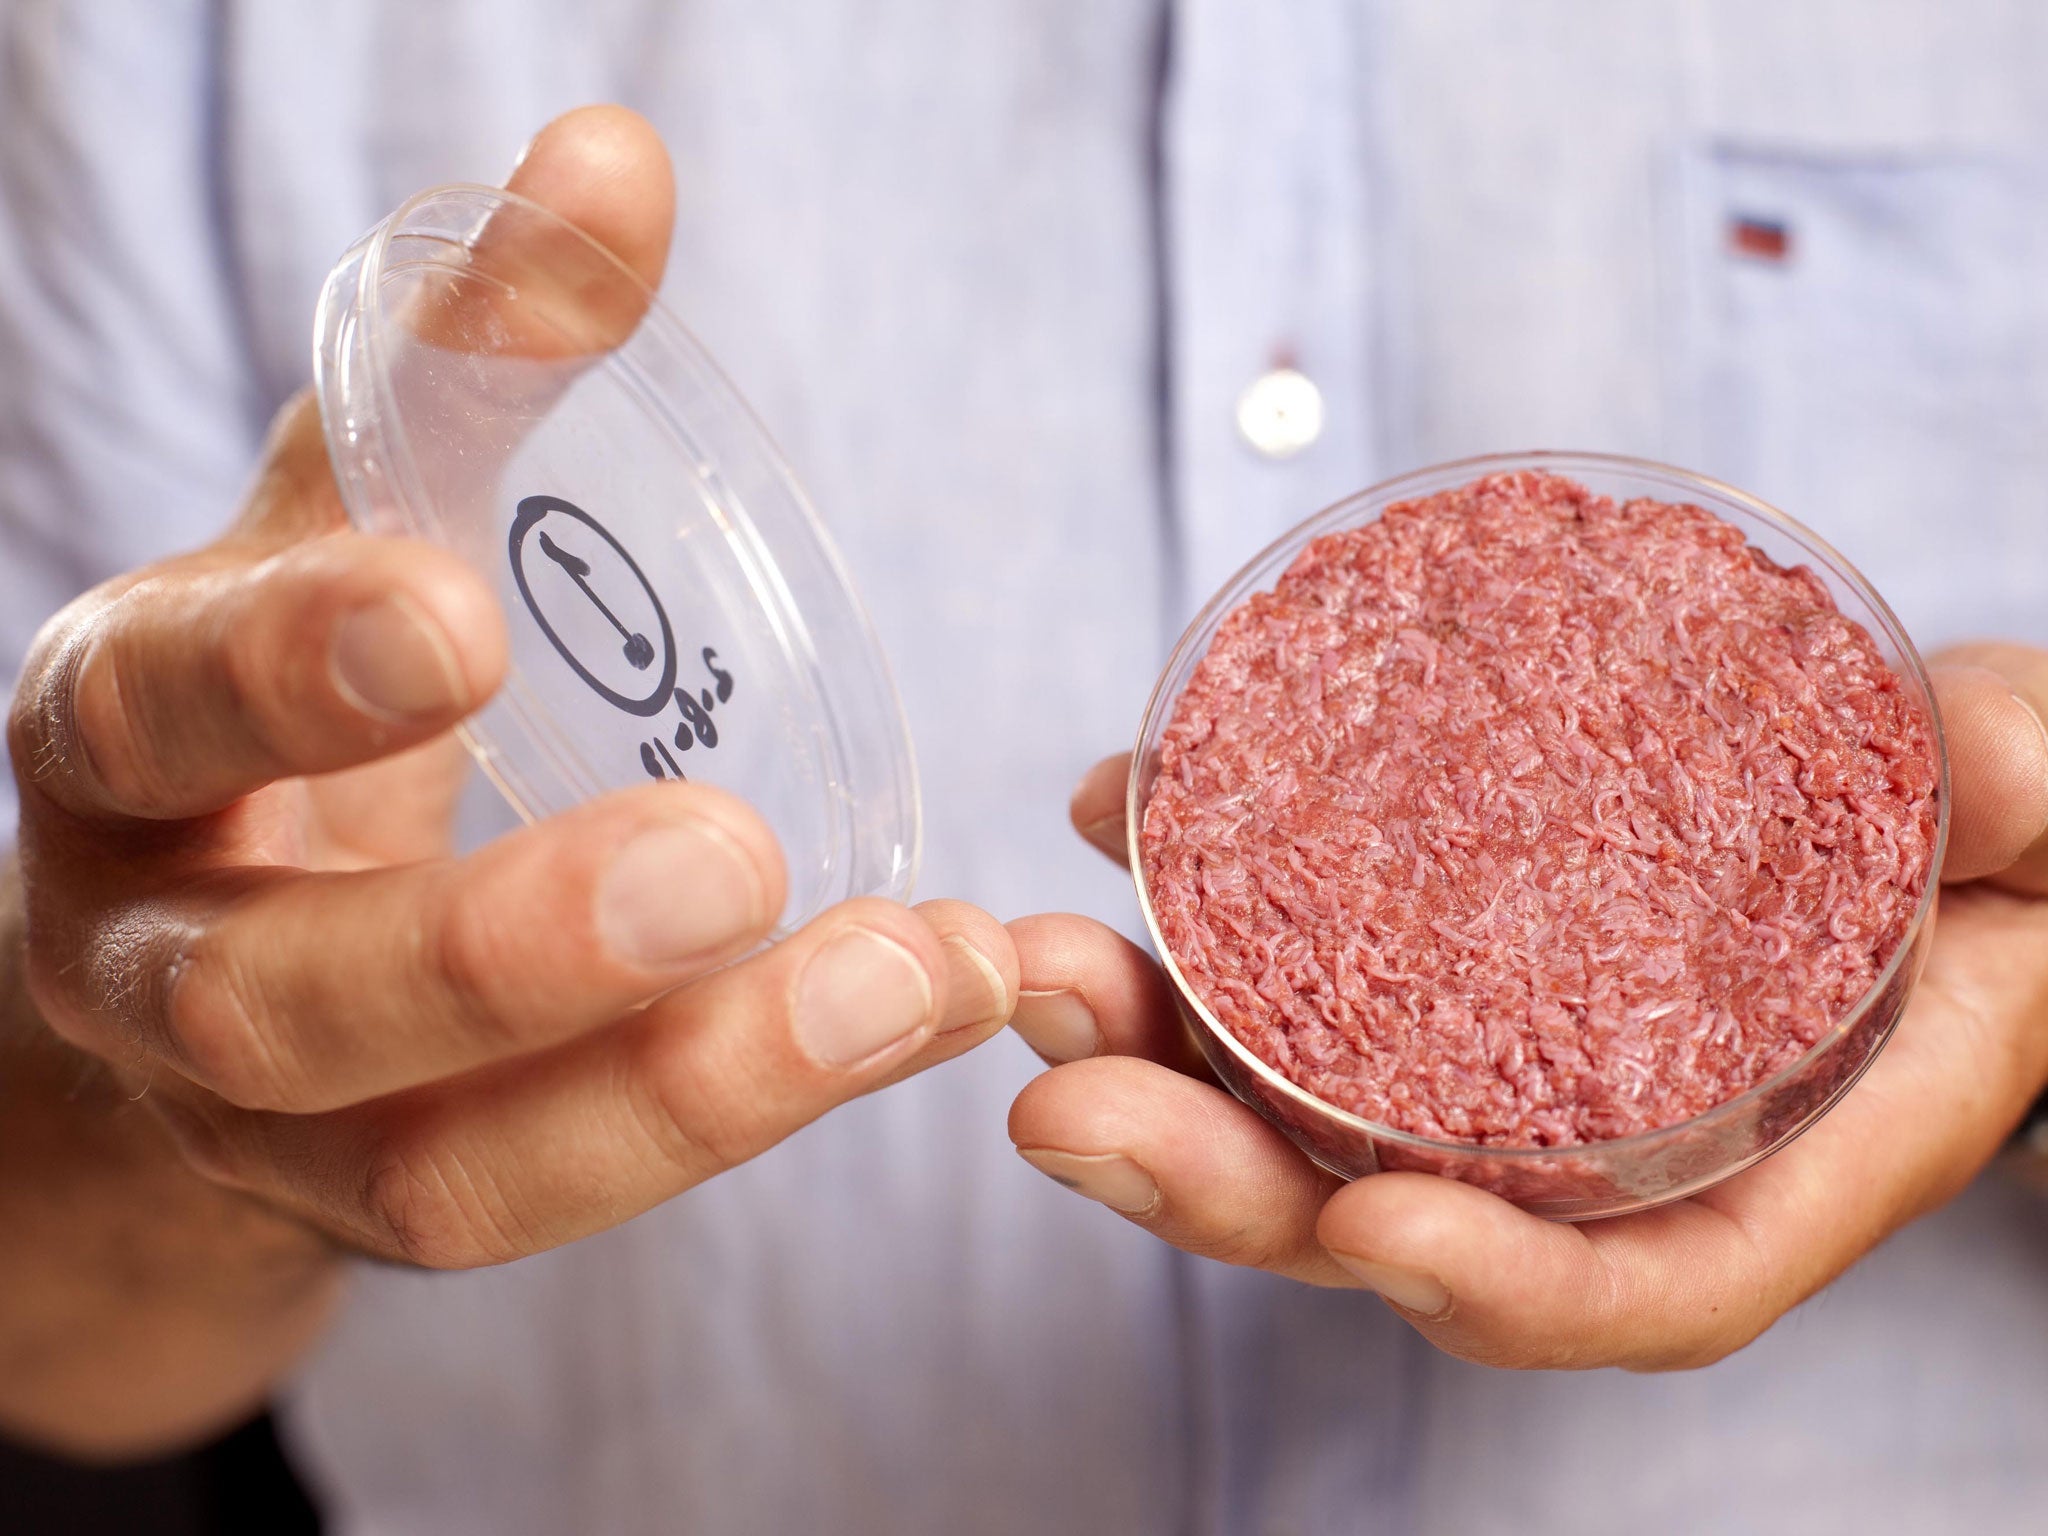 The lab-grown meat burger is made from Cultured Beef